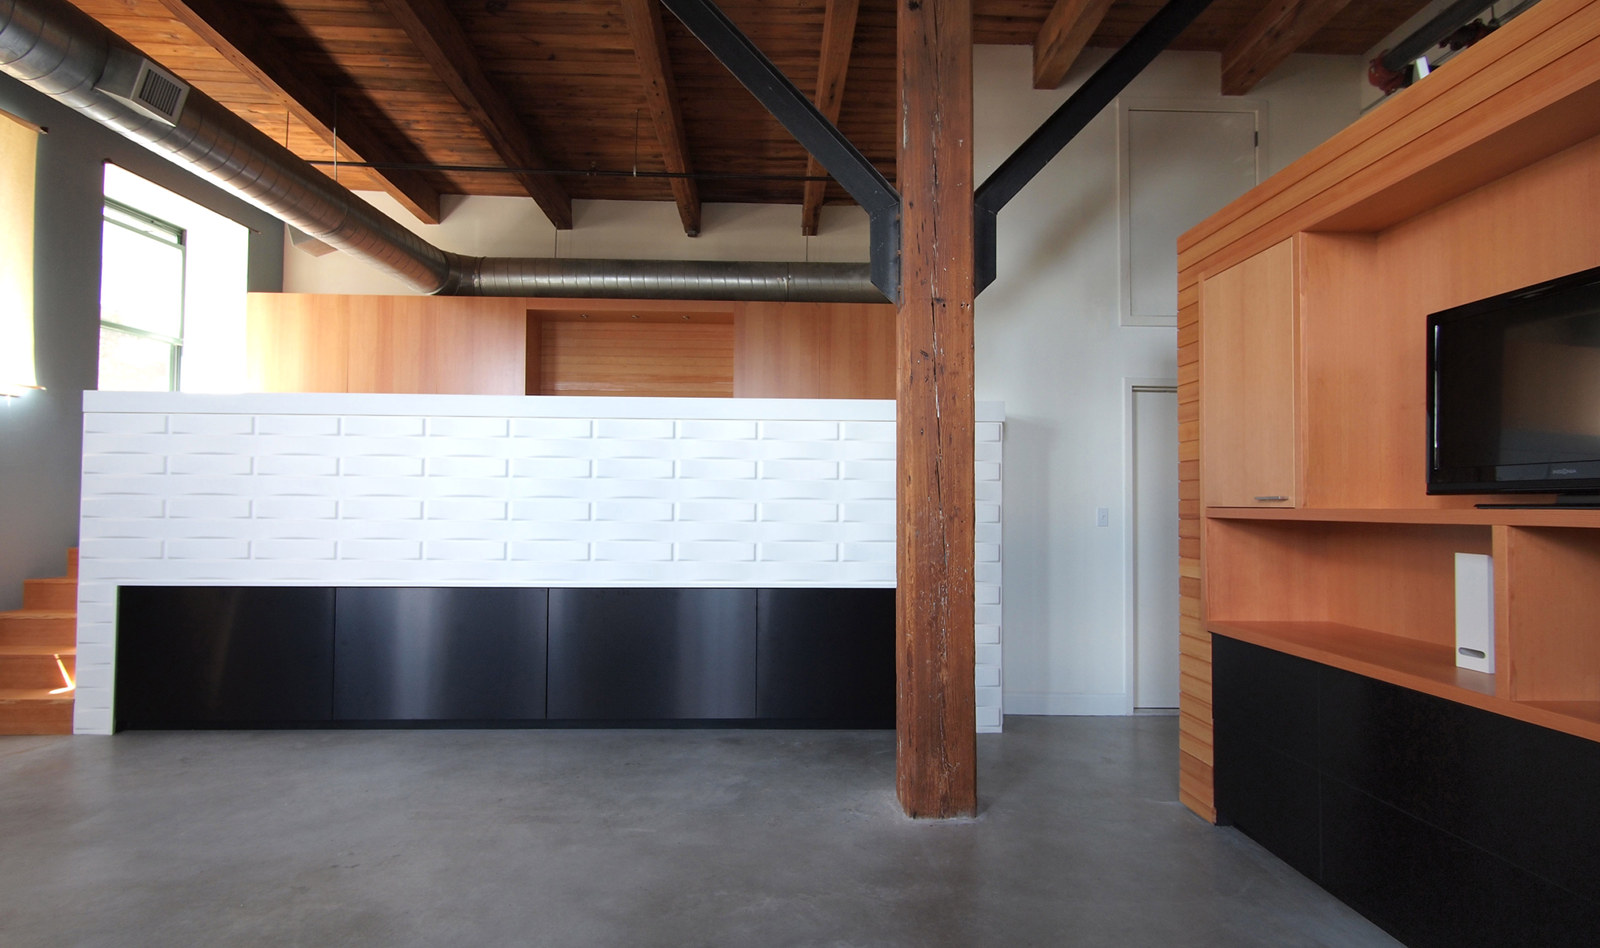 Industrial open loft renovation with exposed structure, custom cabinets, textured wall, steel-faced drawers.